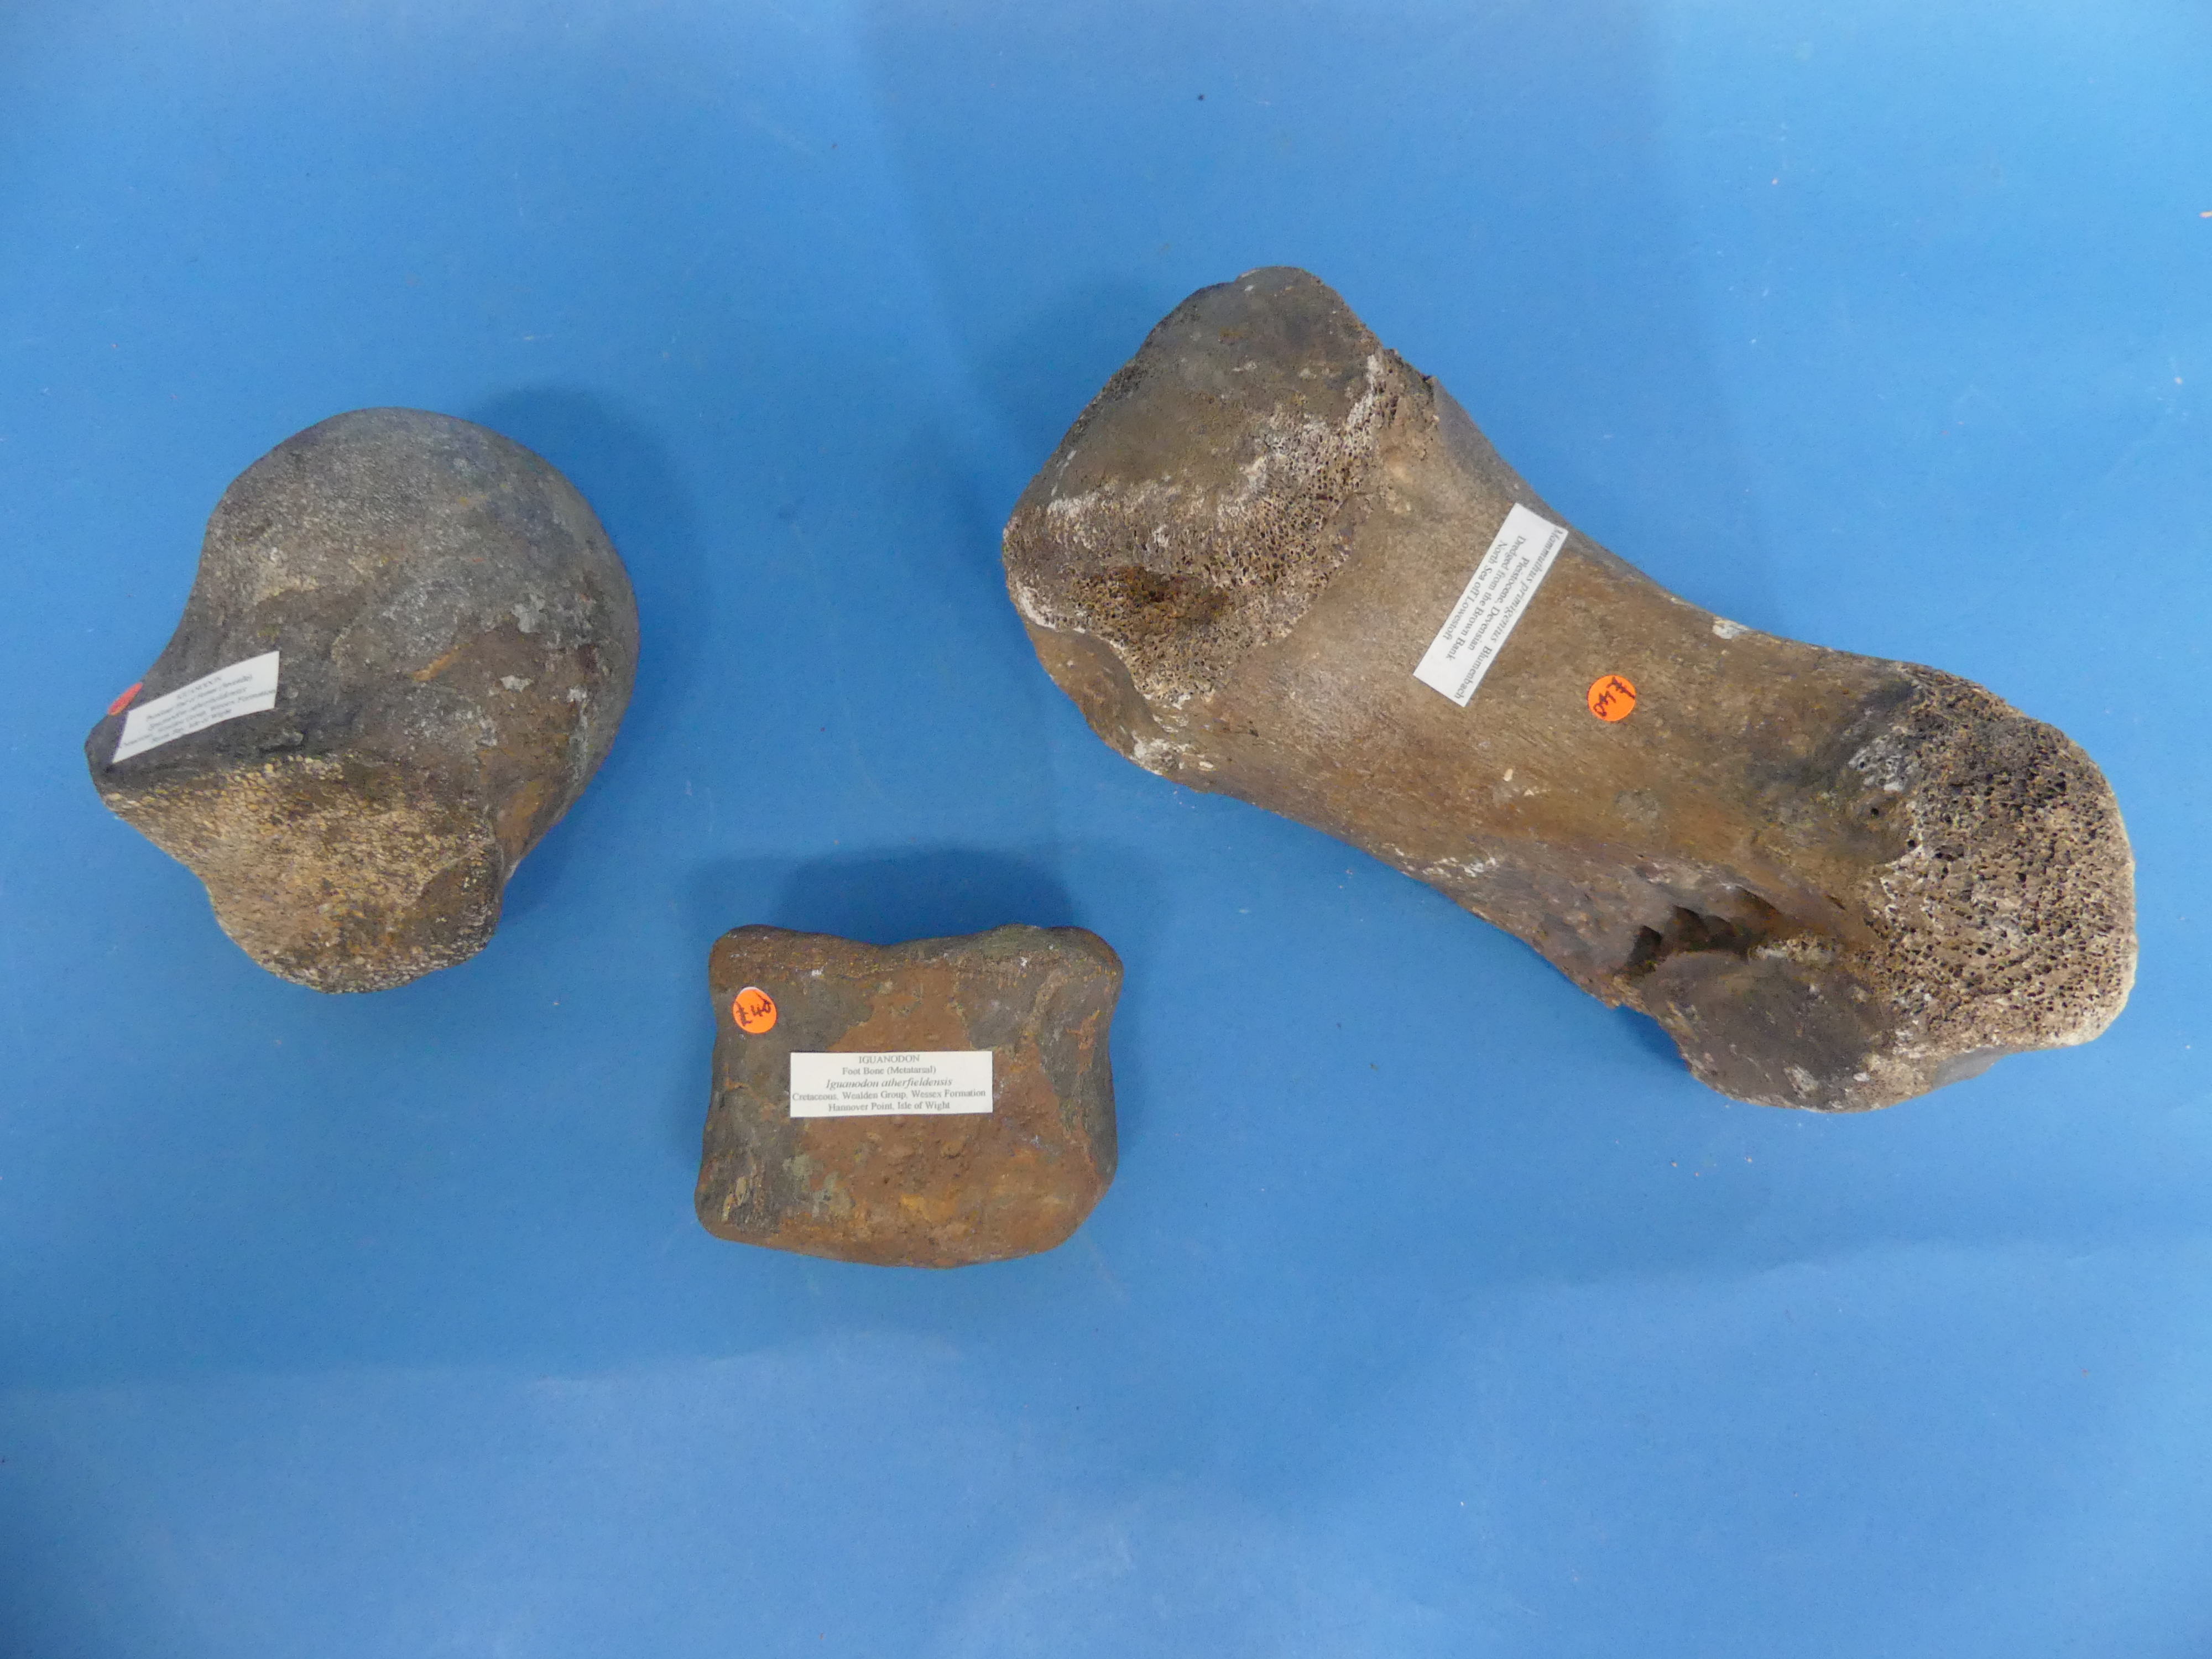 Natural History, Paleontology and Minerals; Two Iguanodon Bone Fossil Specimens, Cretaceous - Image 2 of 8